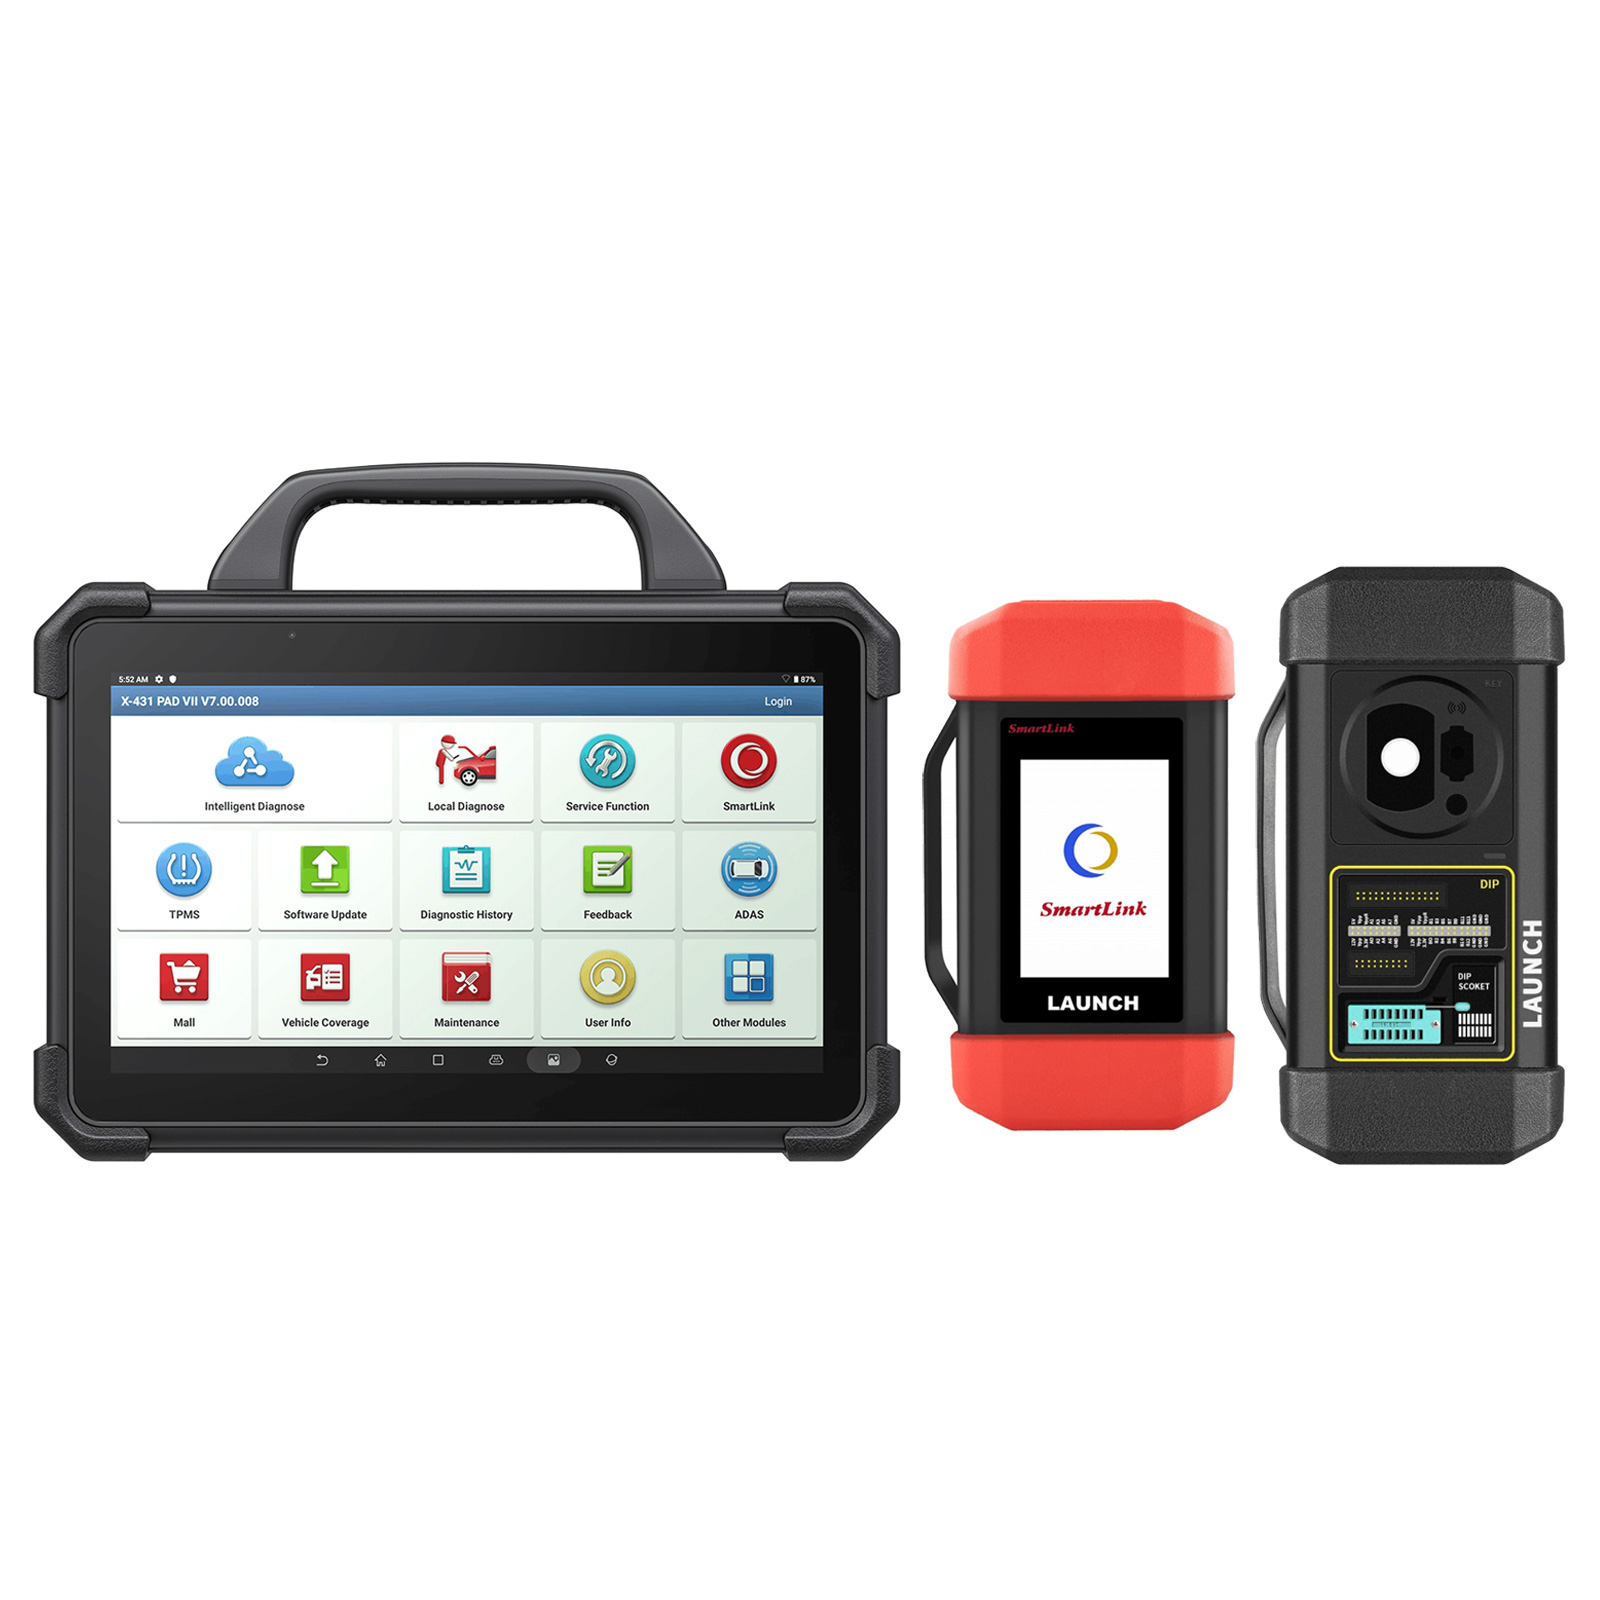 Launch X431 ProS Mini Android Multi-system Diagnostic and Service Tool